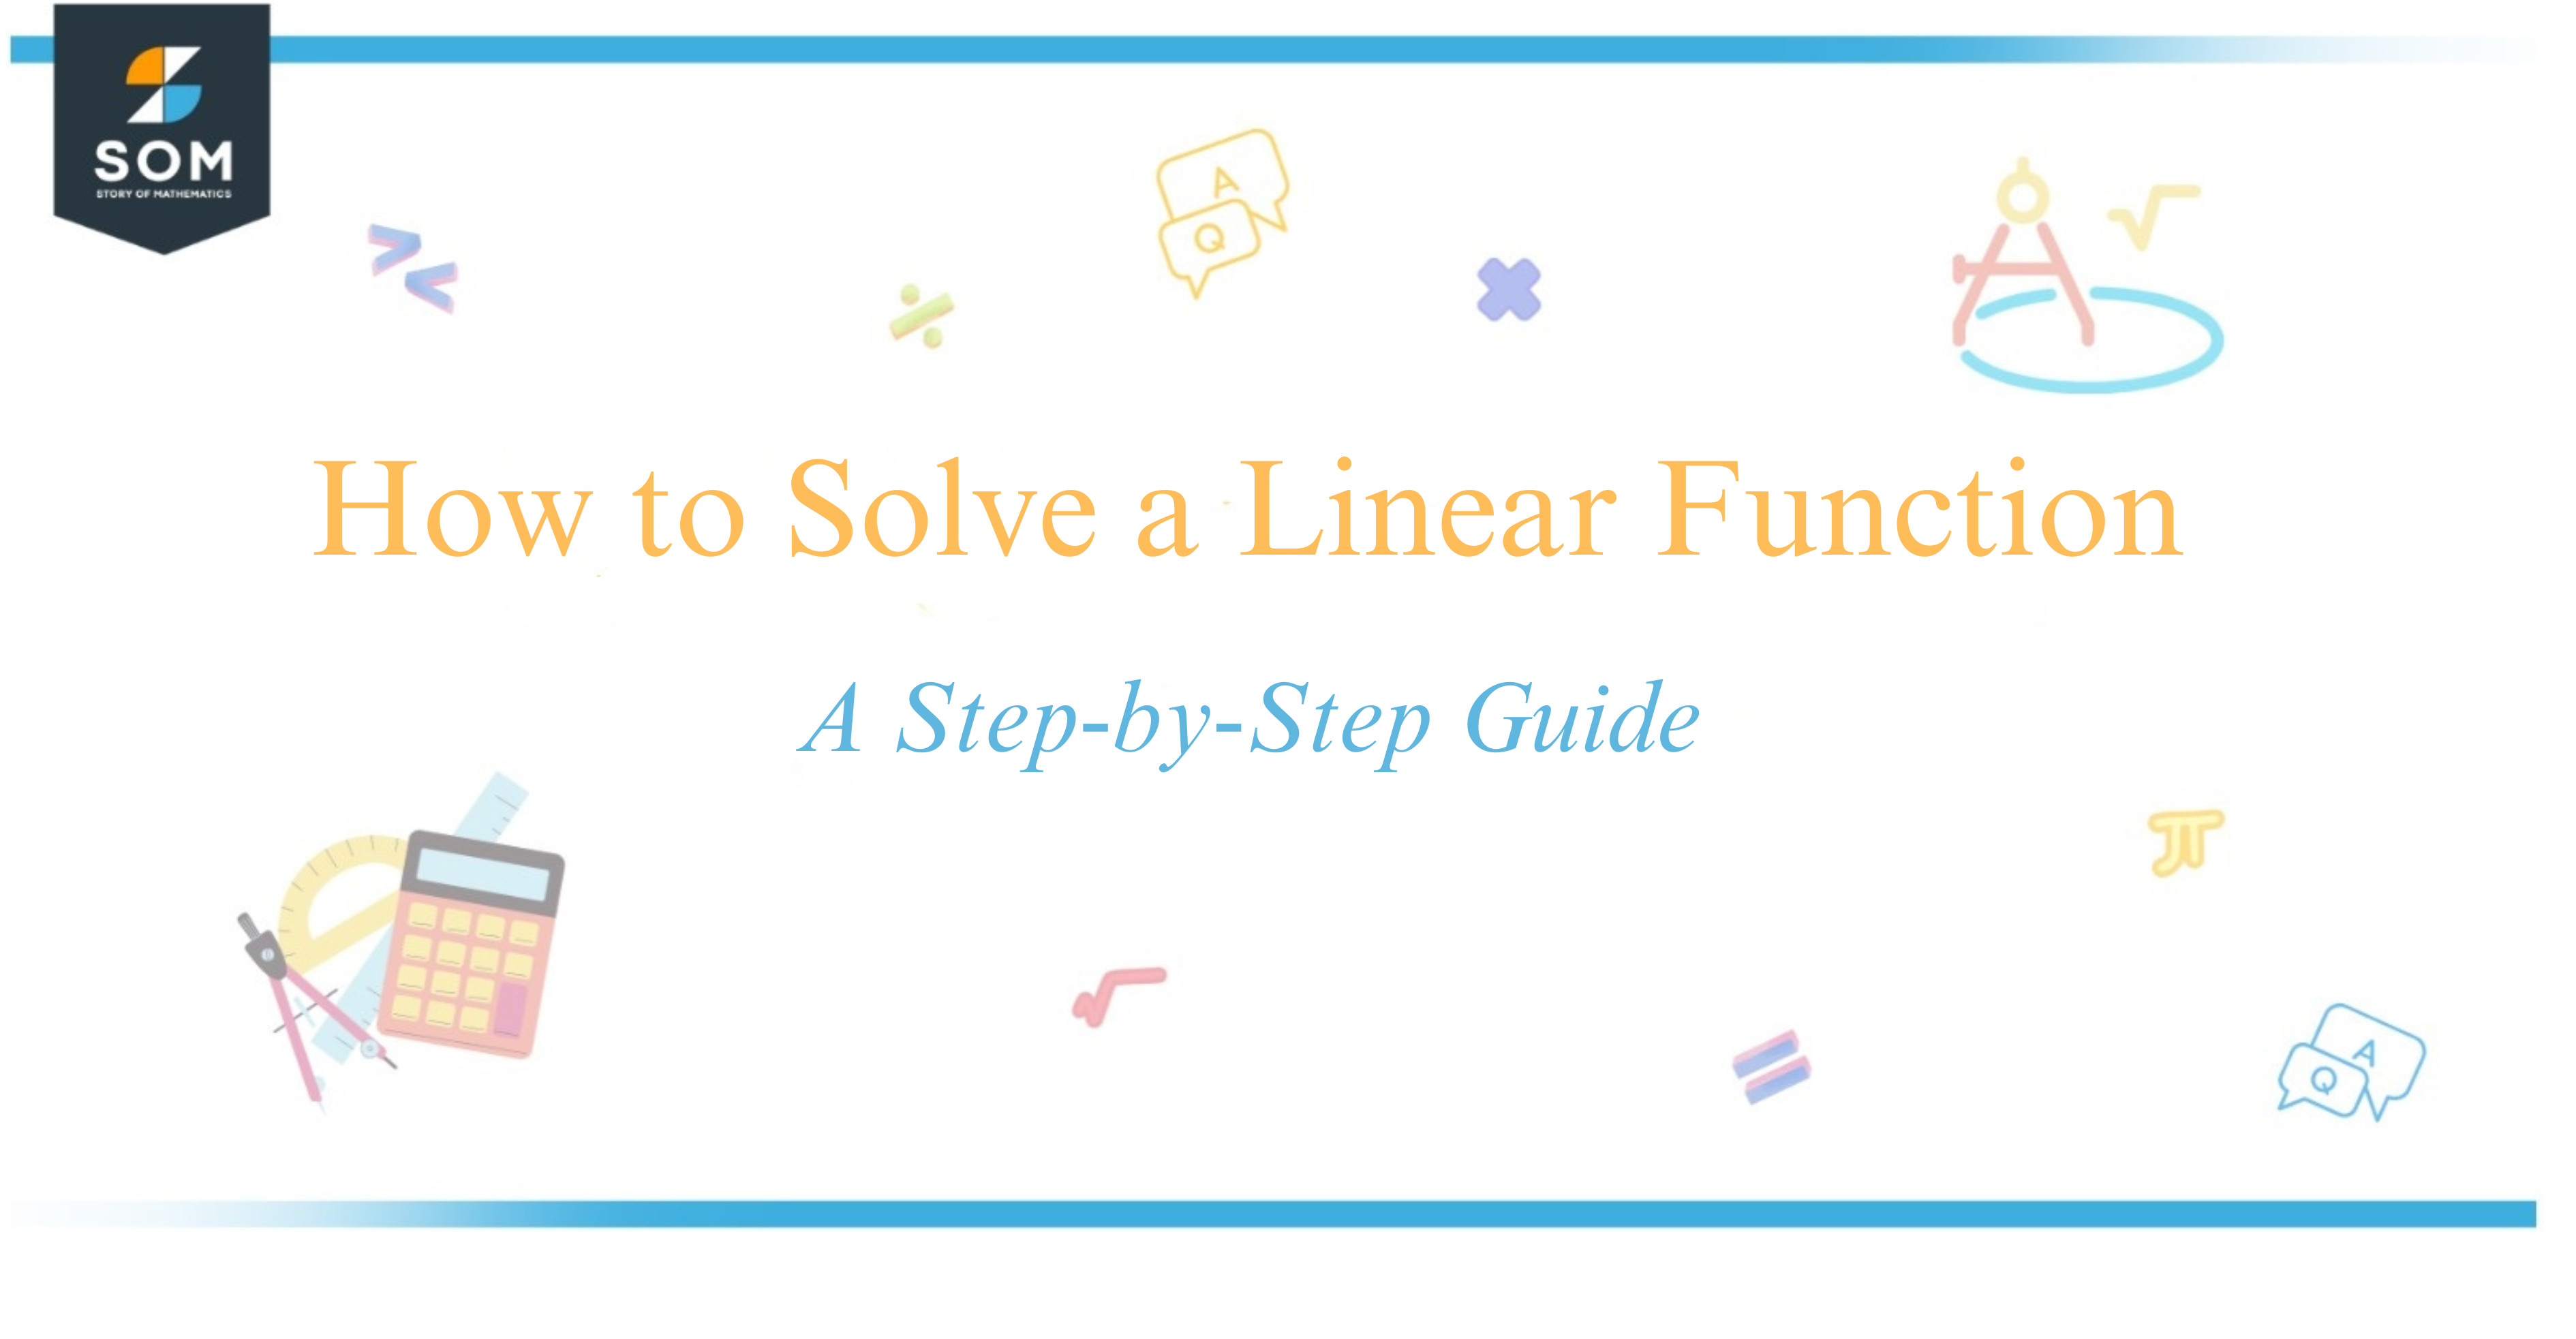 How to Solve a Linear Function A Step-by-Step Guide